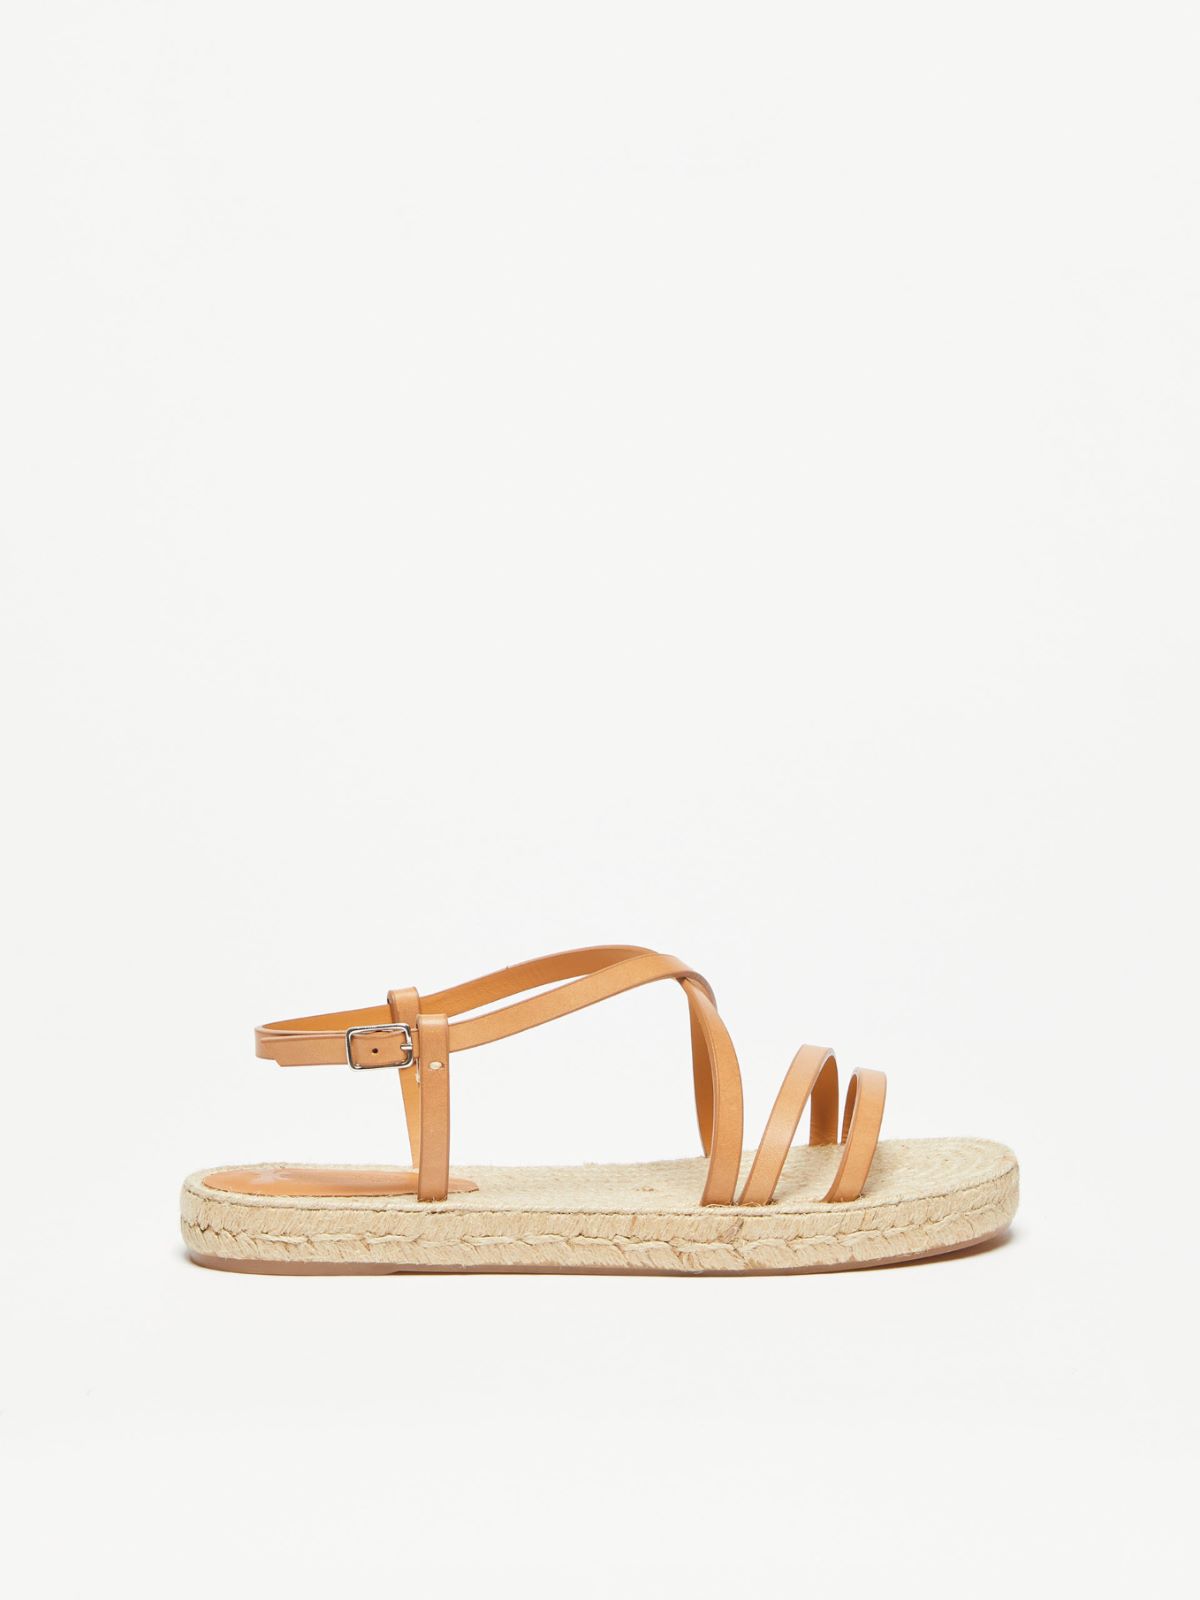 Leather sandals - COLONIAL - Weekend Max Mara